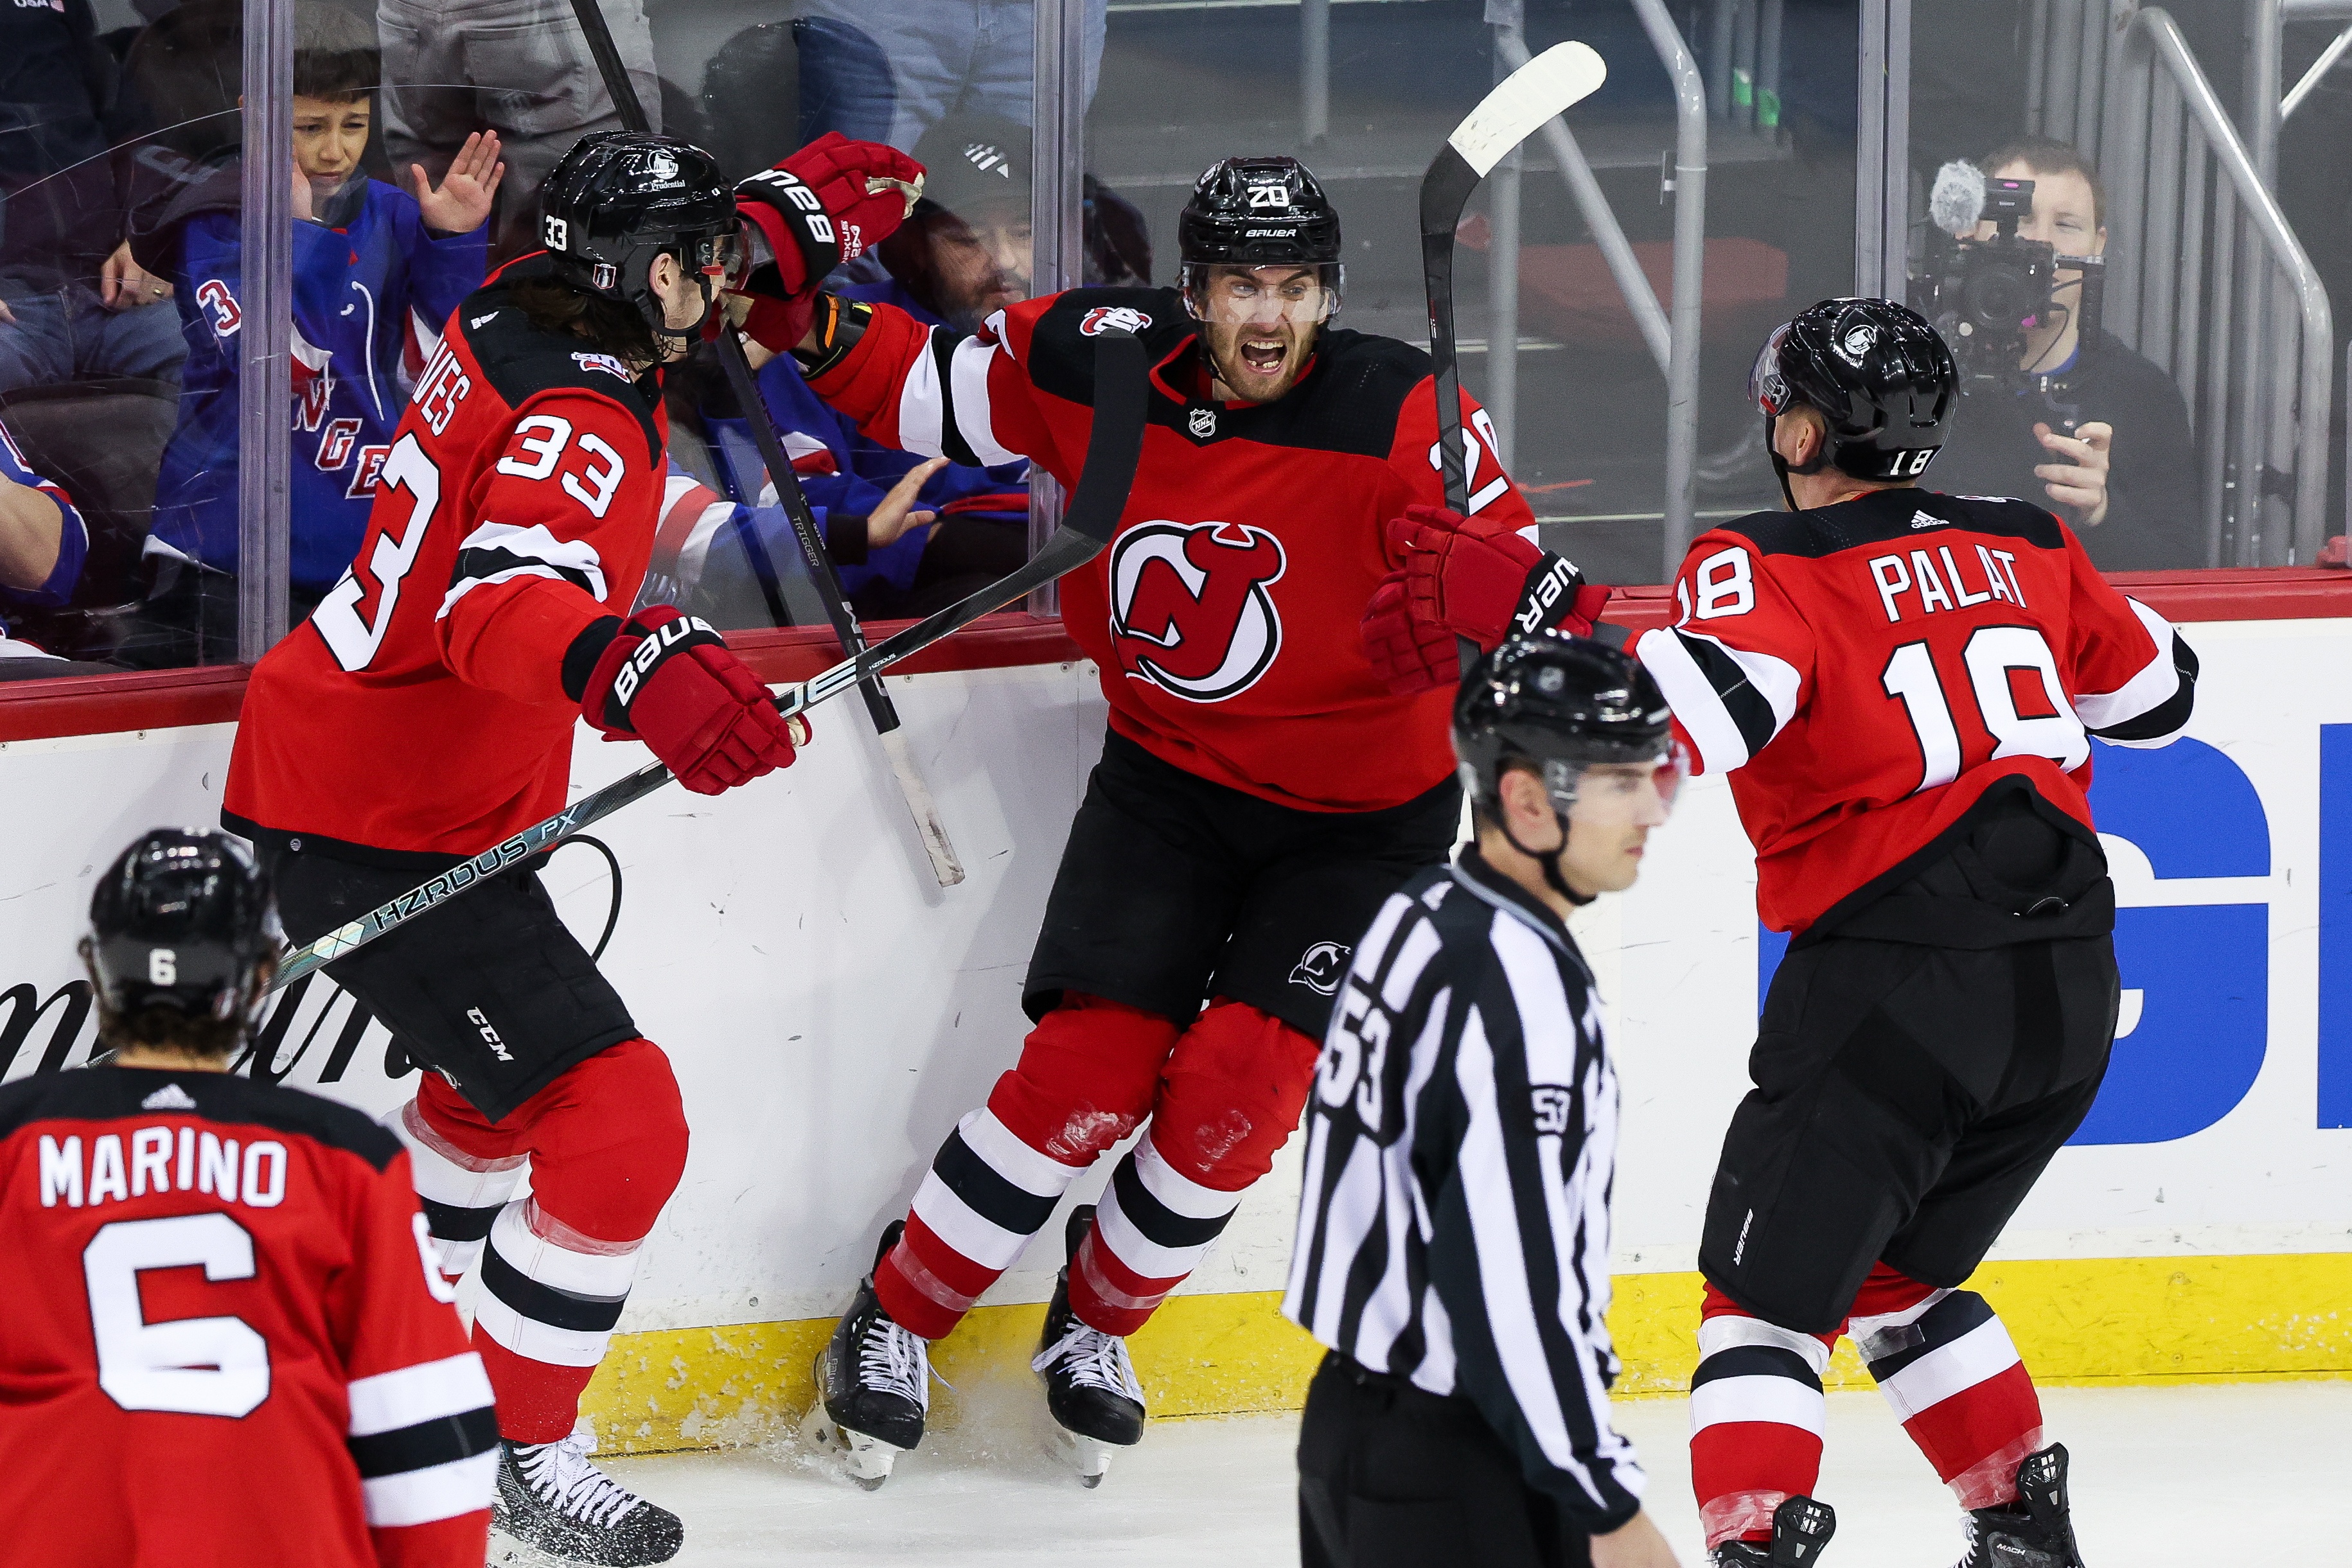 NHL: MAY 01 Eastern Conference First Round - Rangers at Devils